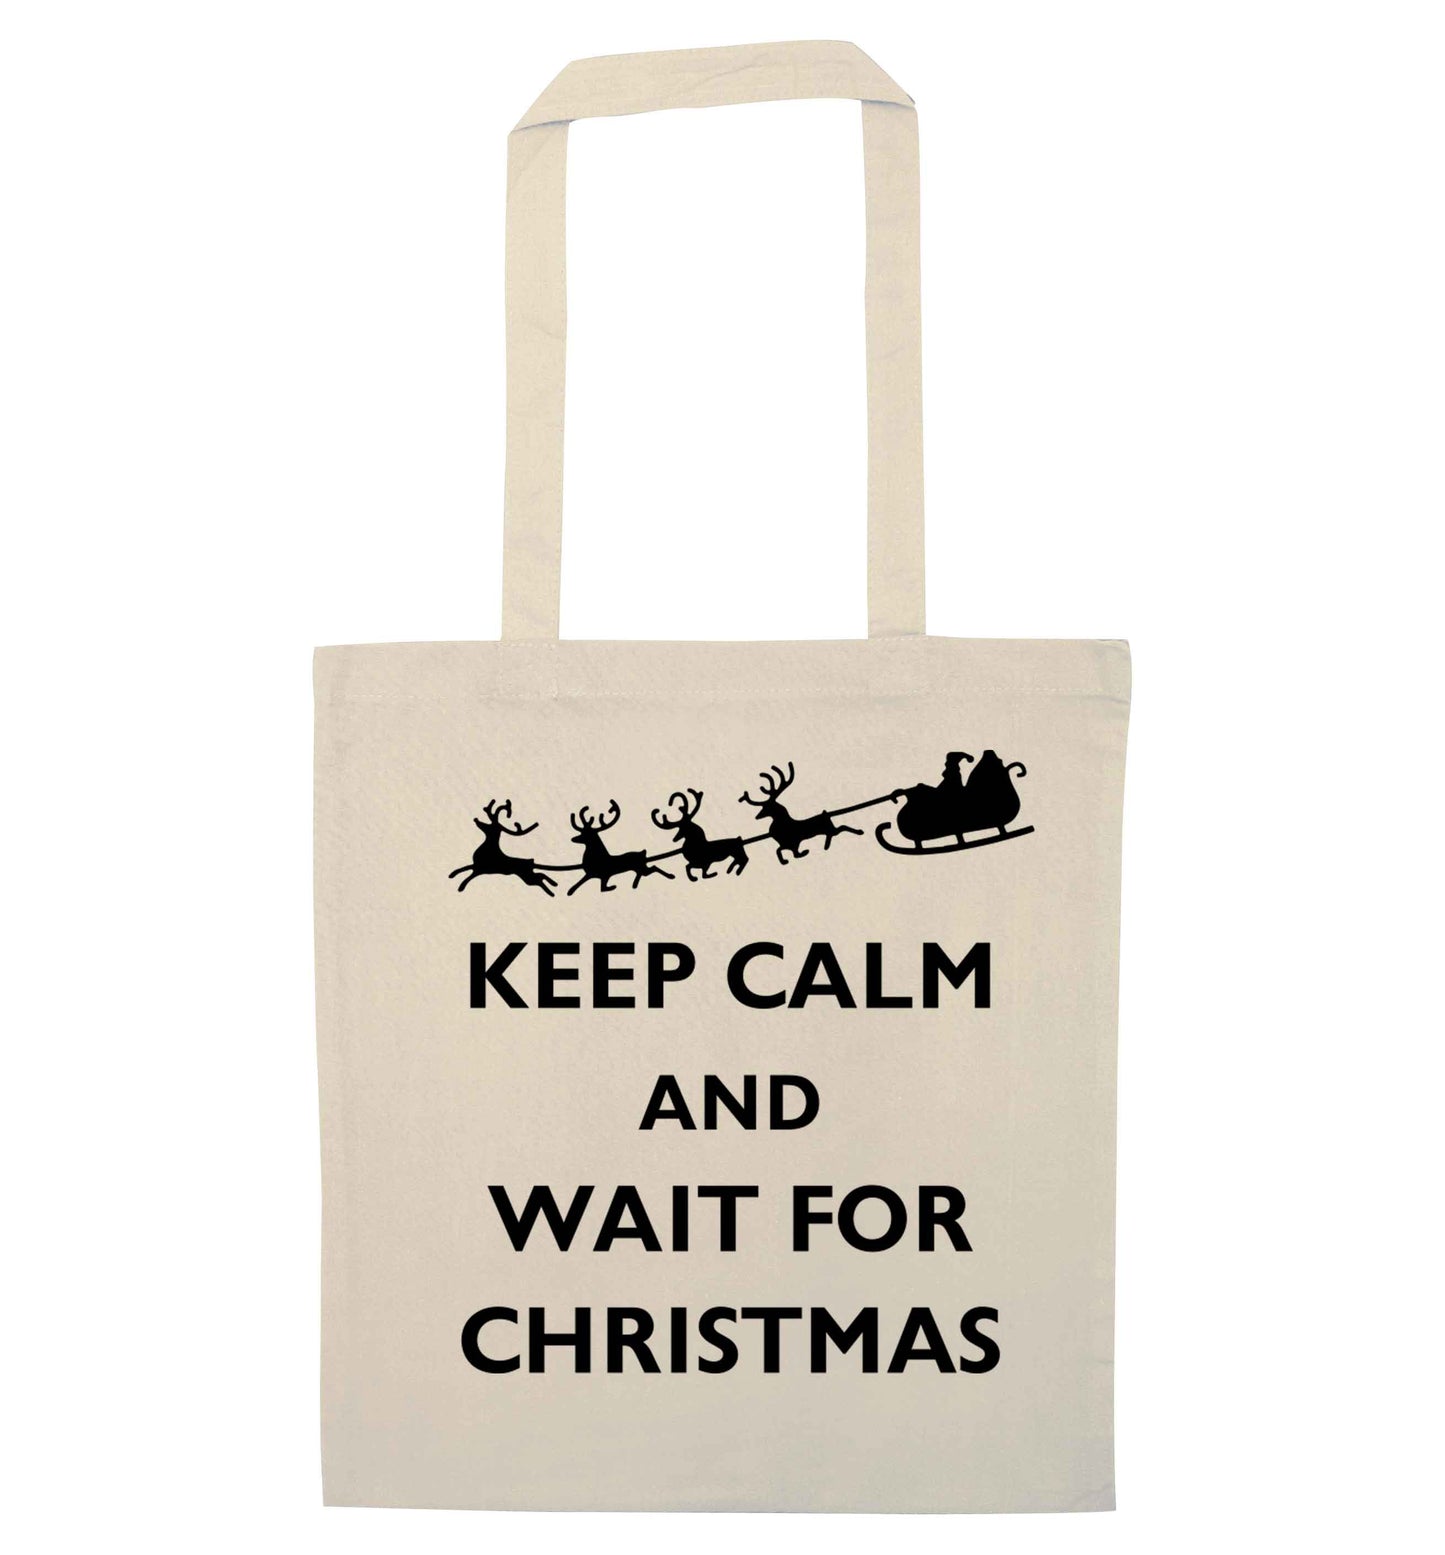 Keep calm and wait for Christmas natural tote bag